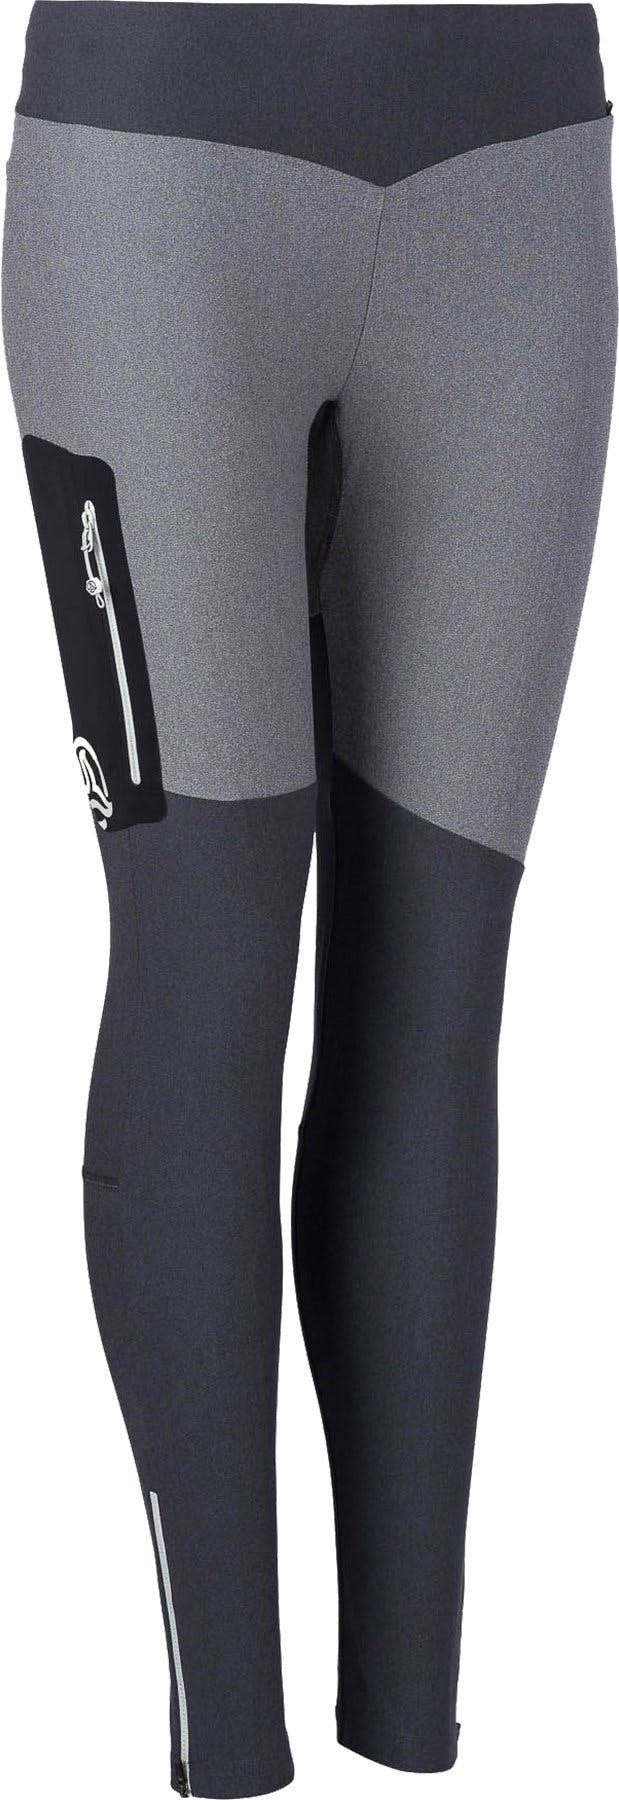 Product image for Abura Tight - Women's